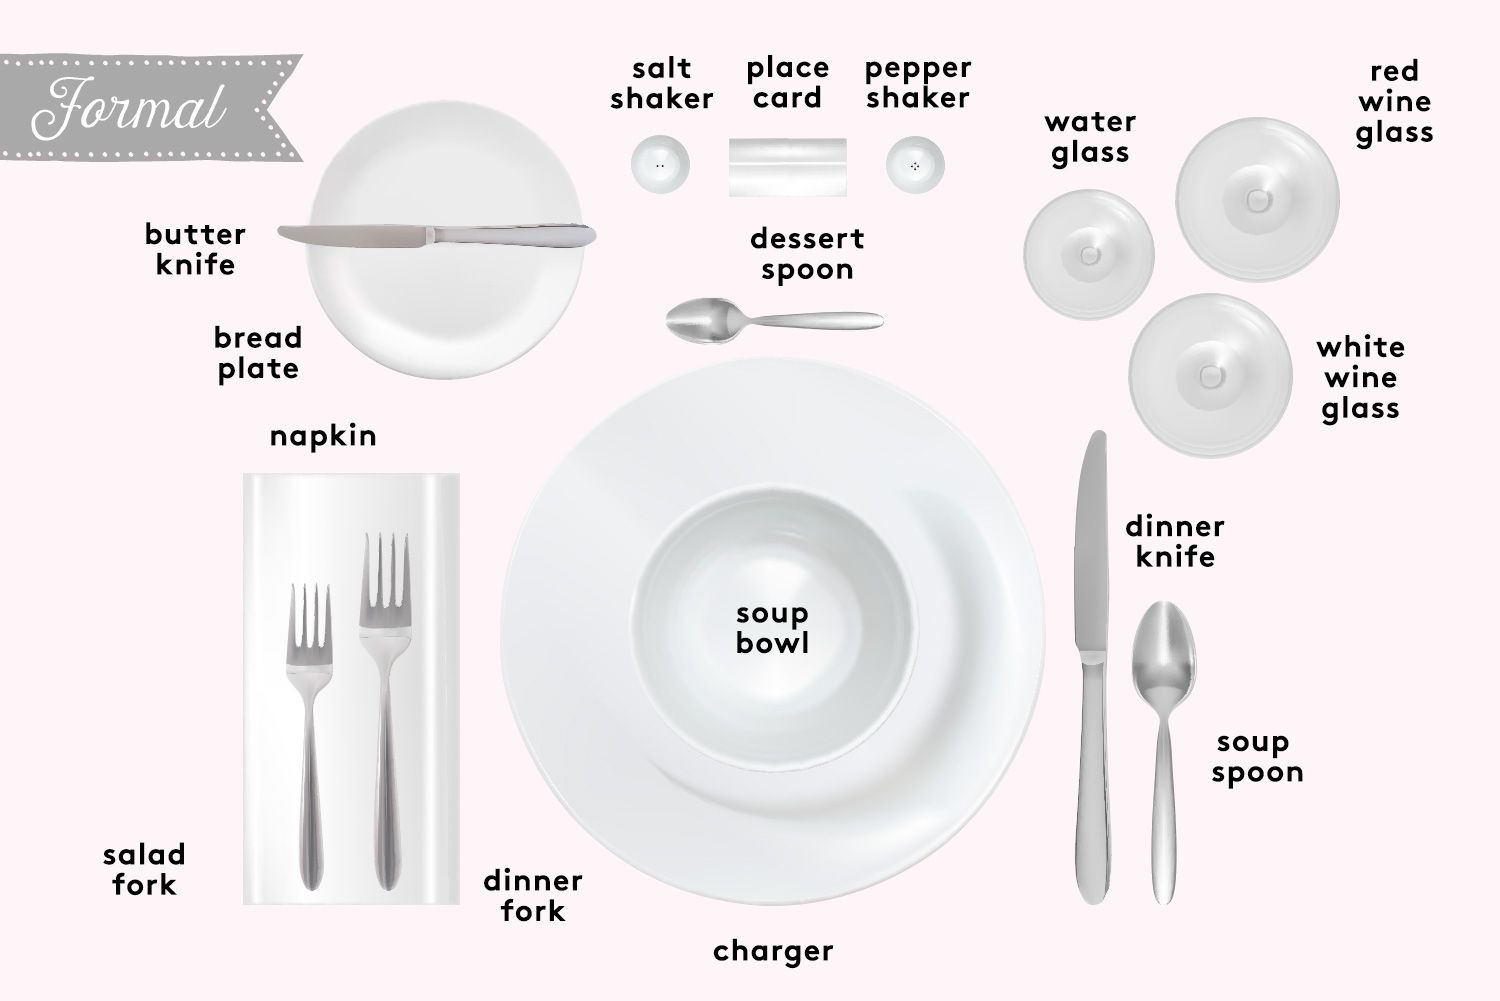 italic liberal here how to set cutlery on dining table Lee Auckland level